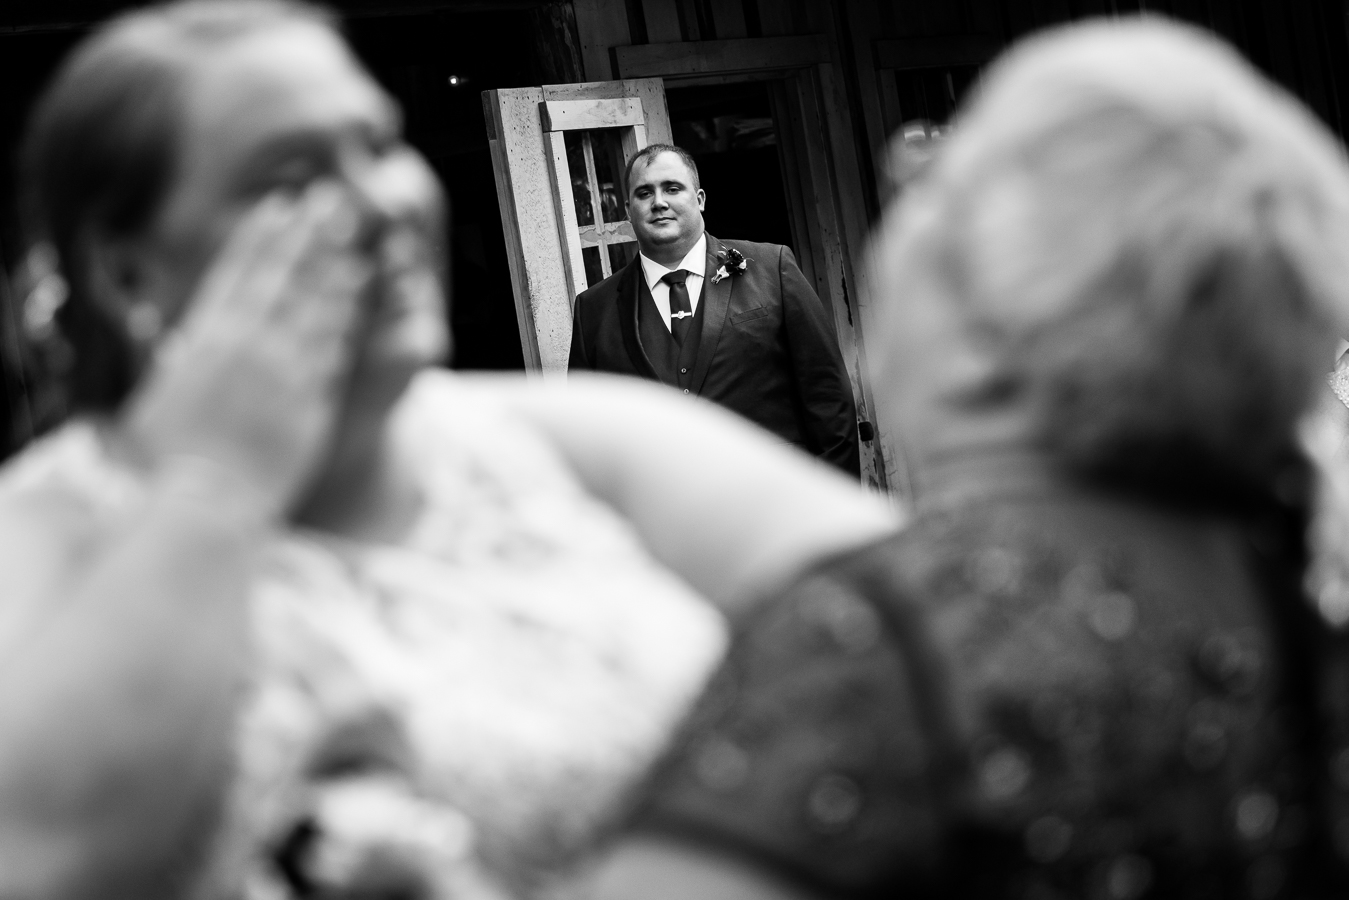 Oak Lodge Wedding Photographer, rhinehart photography, captures this black and white image from a unique perspective of the groom lovingly watching his new bride wipe away her tears as she shares her mother daughter dance 